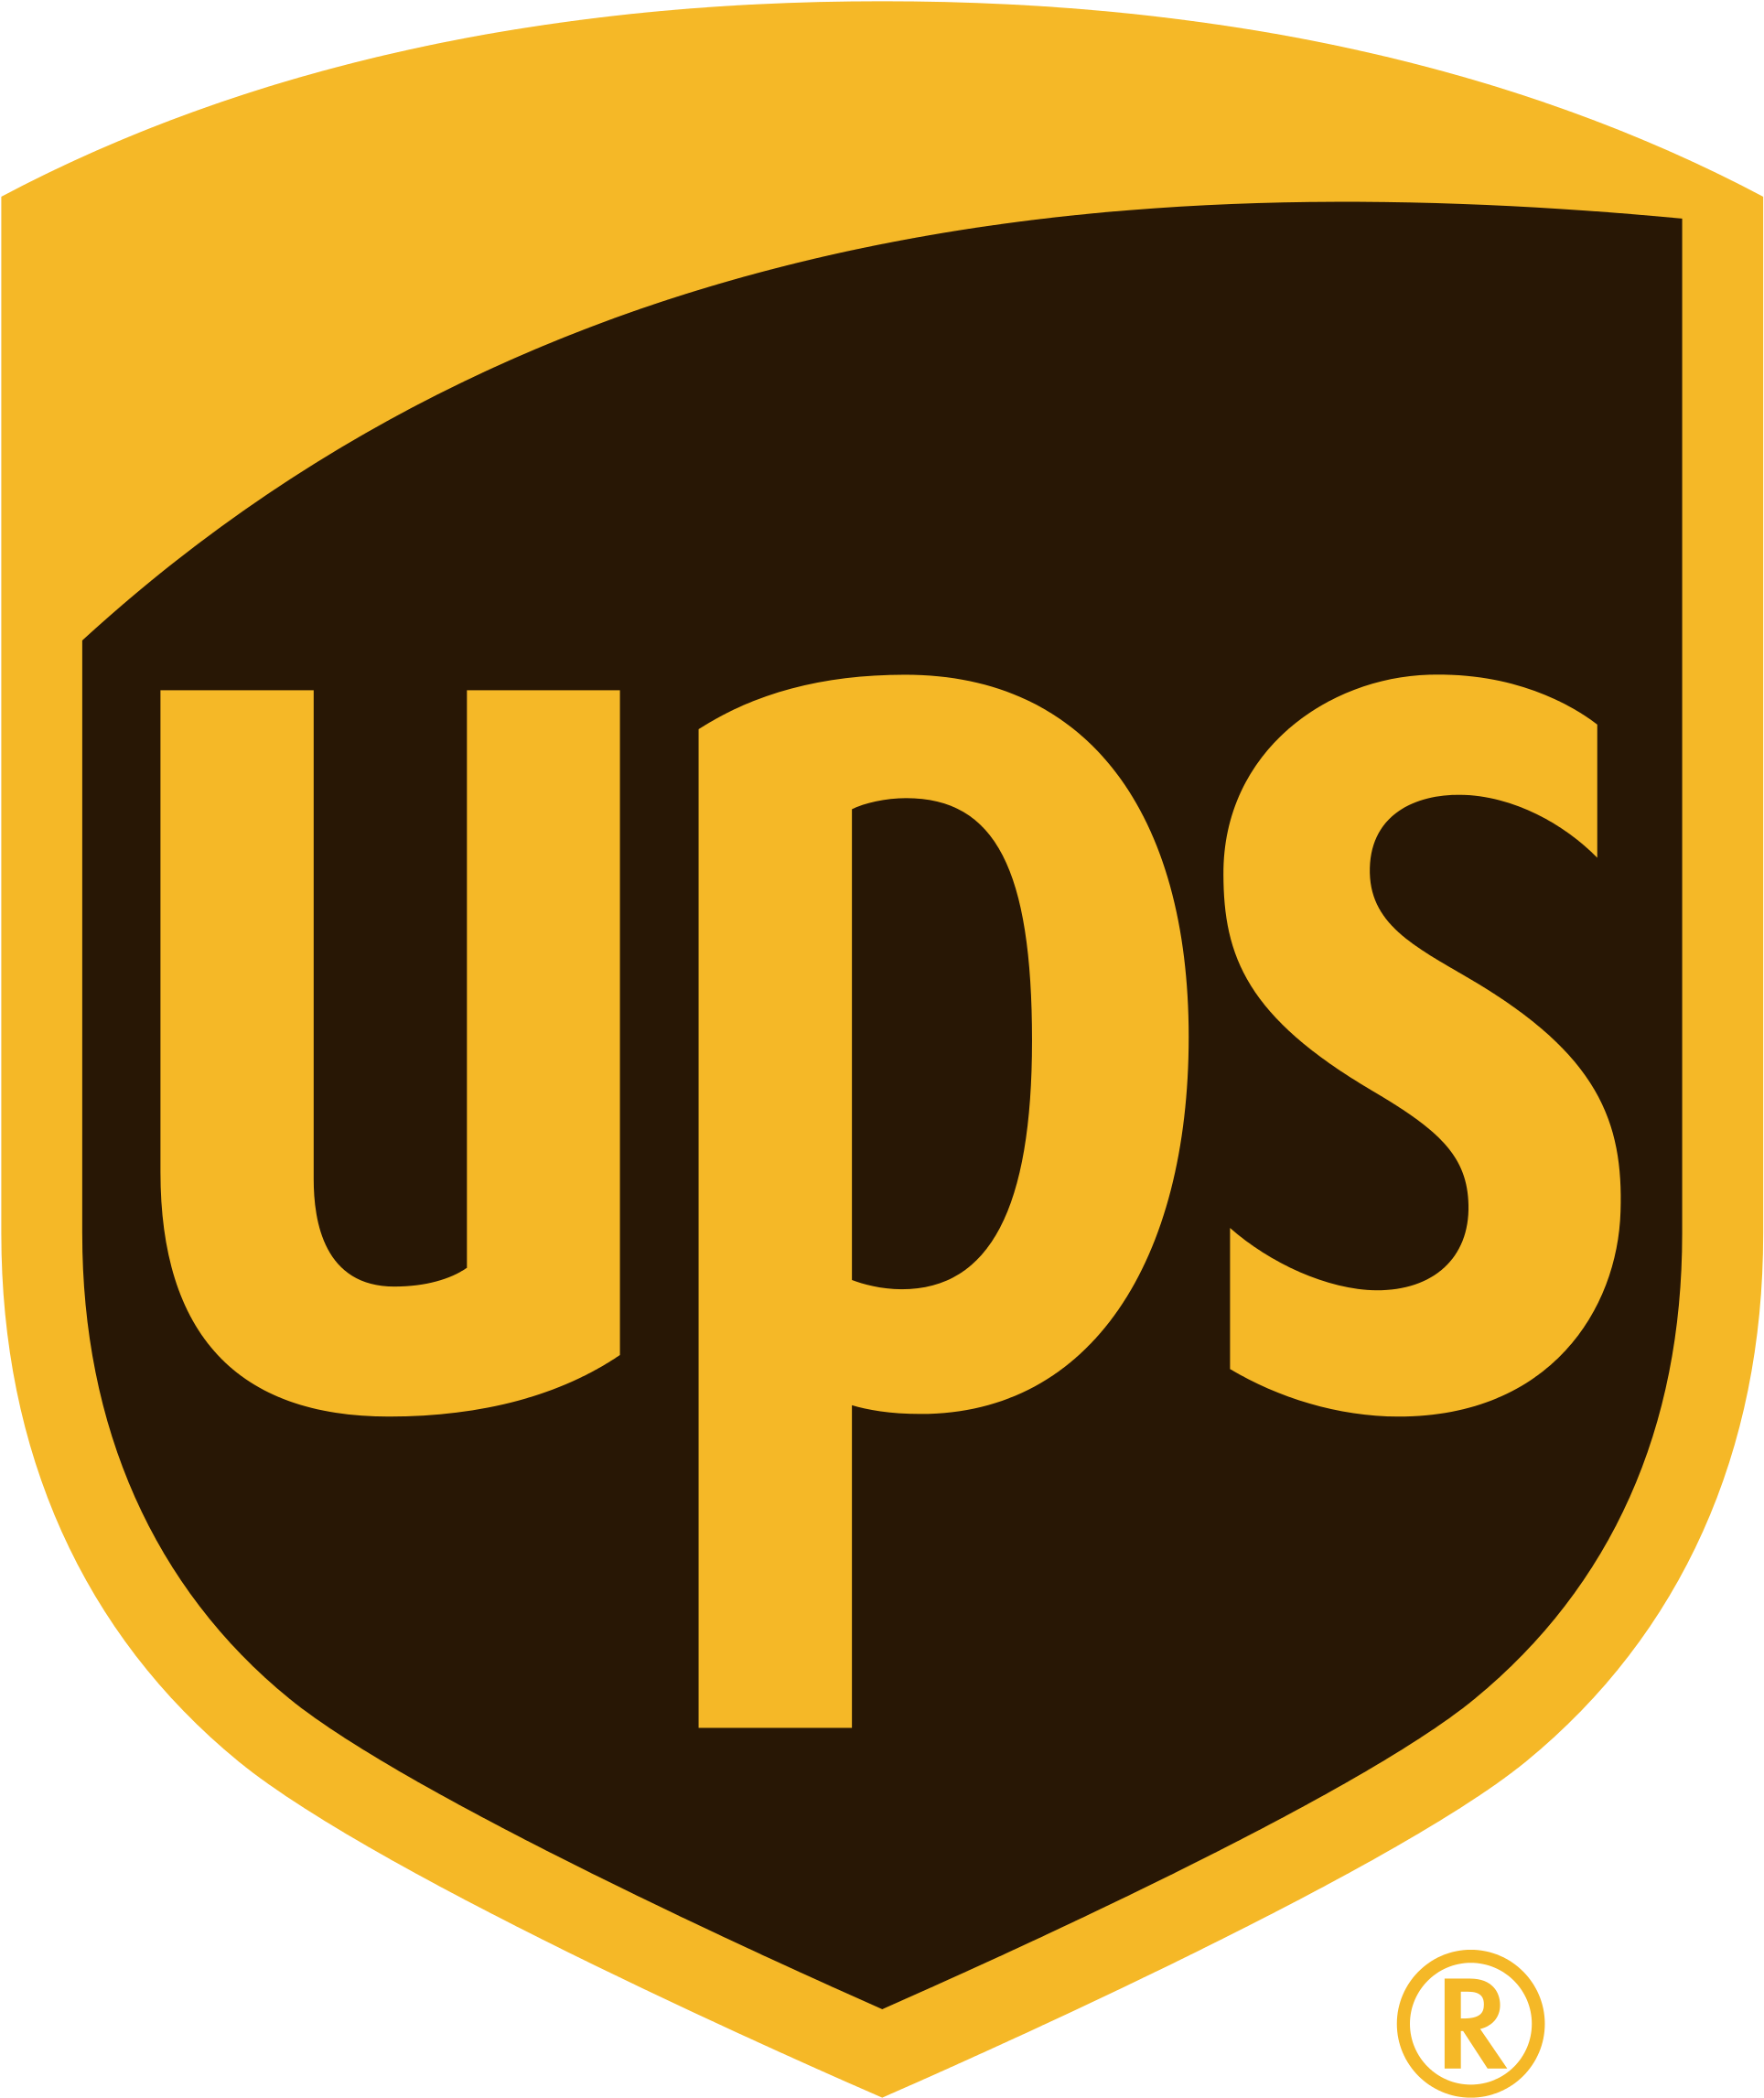 Members Save 30% Off Small Package Shipments, 25% Off - Ups Logo Vector (2000x2340)